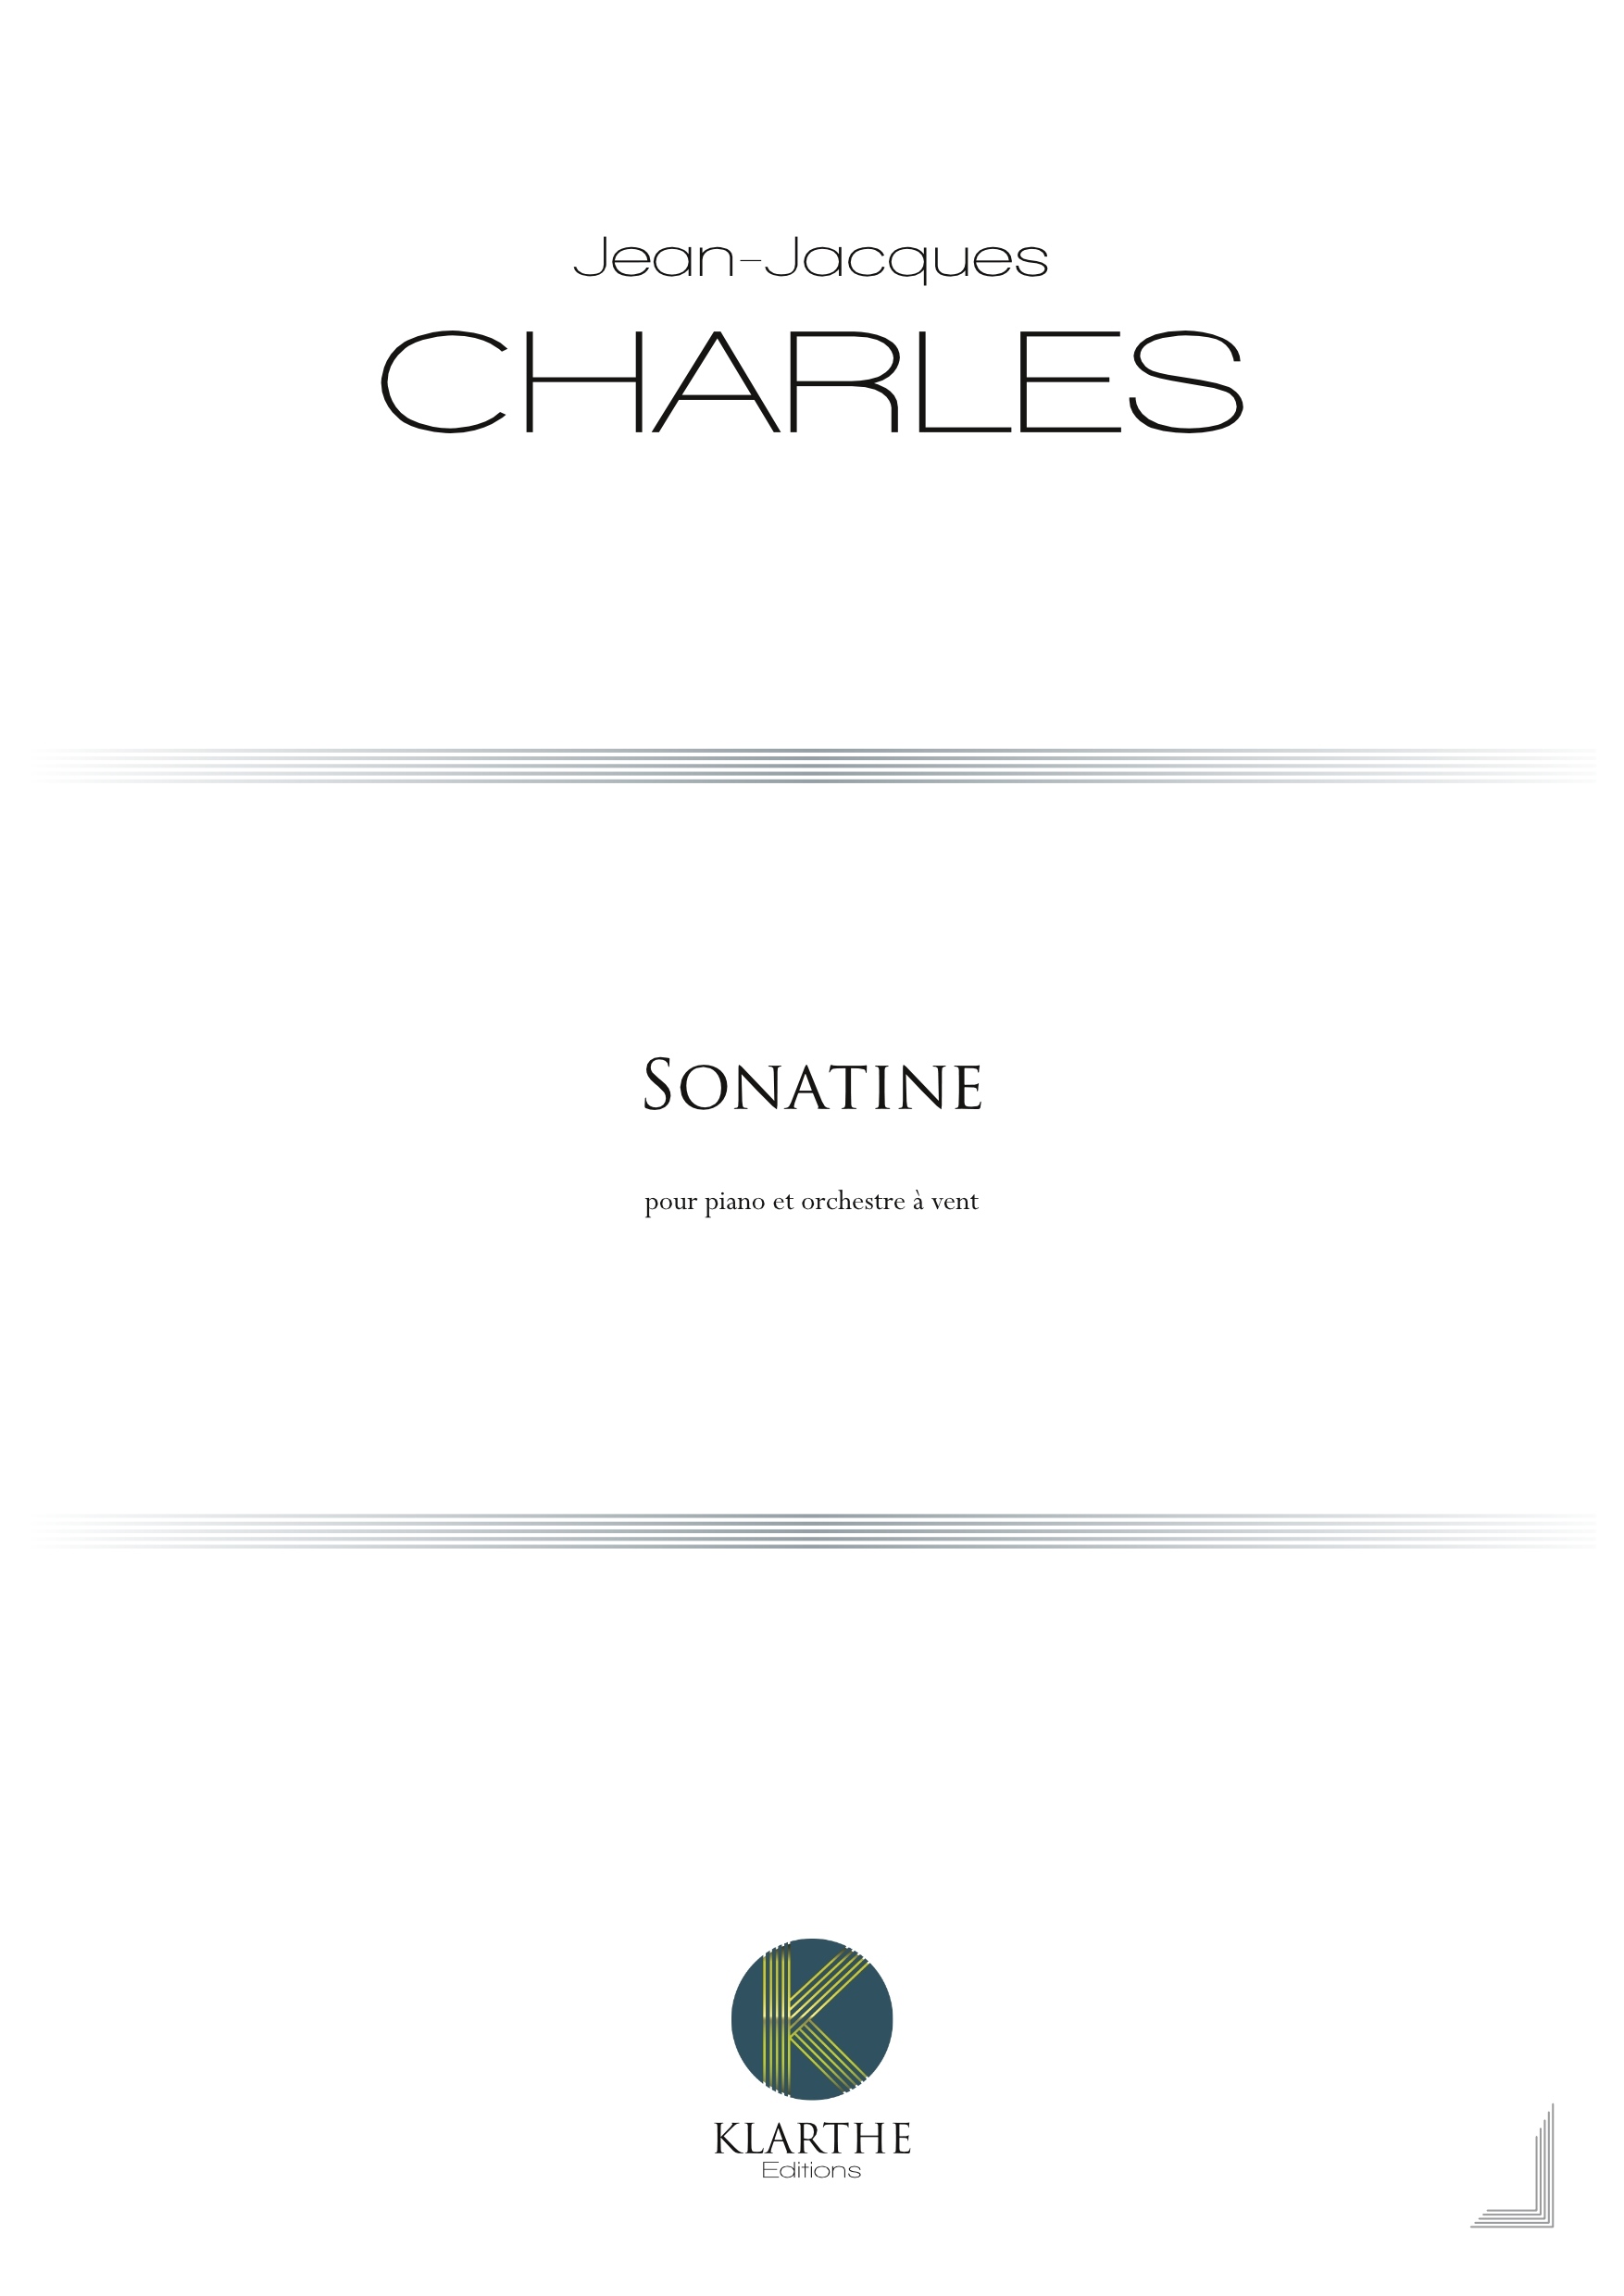 Sonatine (CHARLES JEAN-JACQUES)